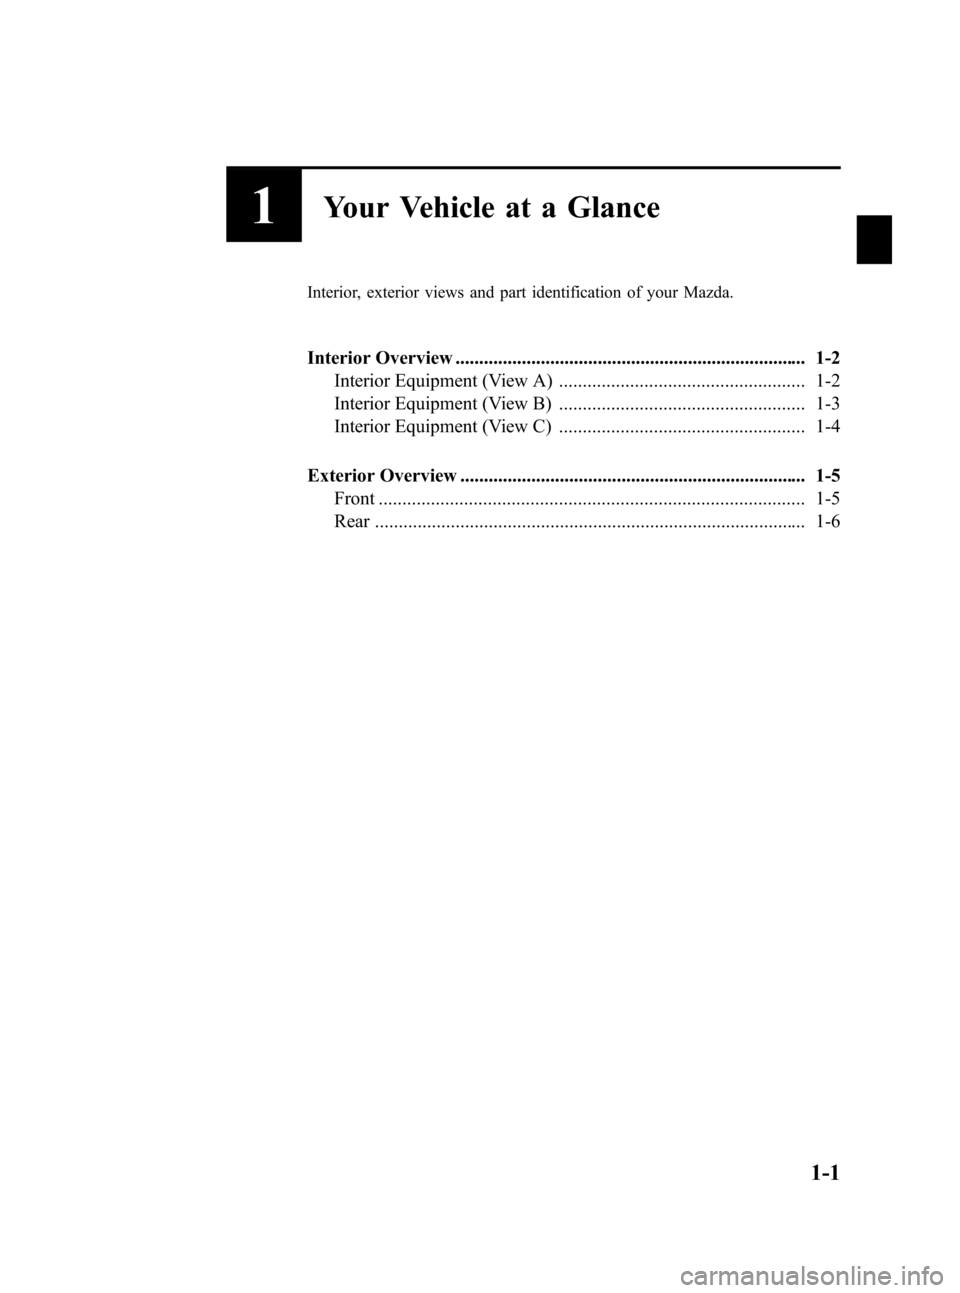 MAZDA MODEL CX-7 2009  Owners Manual (in English) Black plate (7,1)
1Your Vehicle at a Glance
Interior, exterior views and part identification of your Mazda.
Interior Overview ..........................................................................